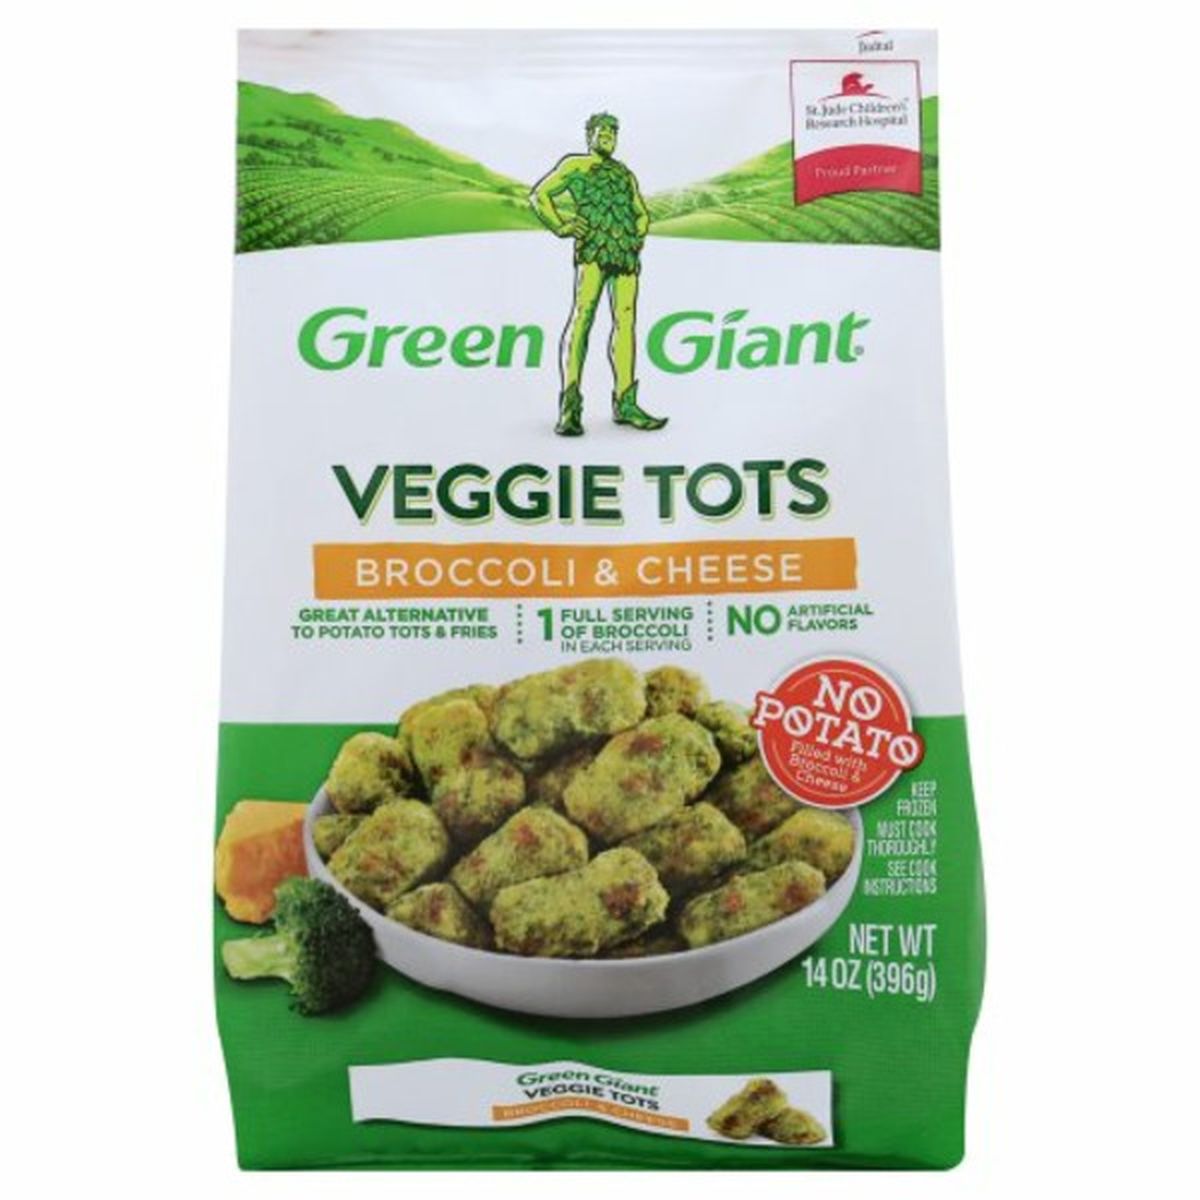 Calories in Green Giant Veggie Tots, Broccoli & Cheese